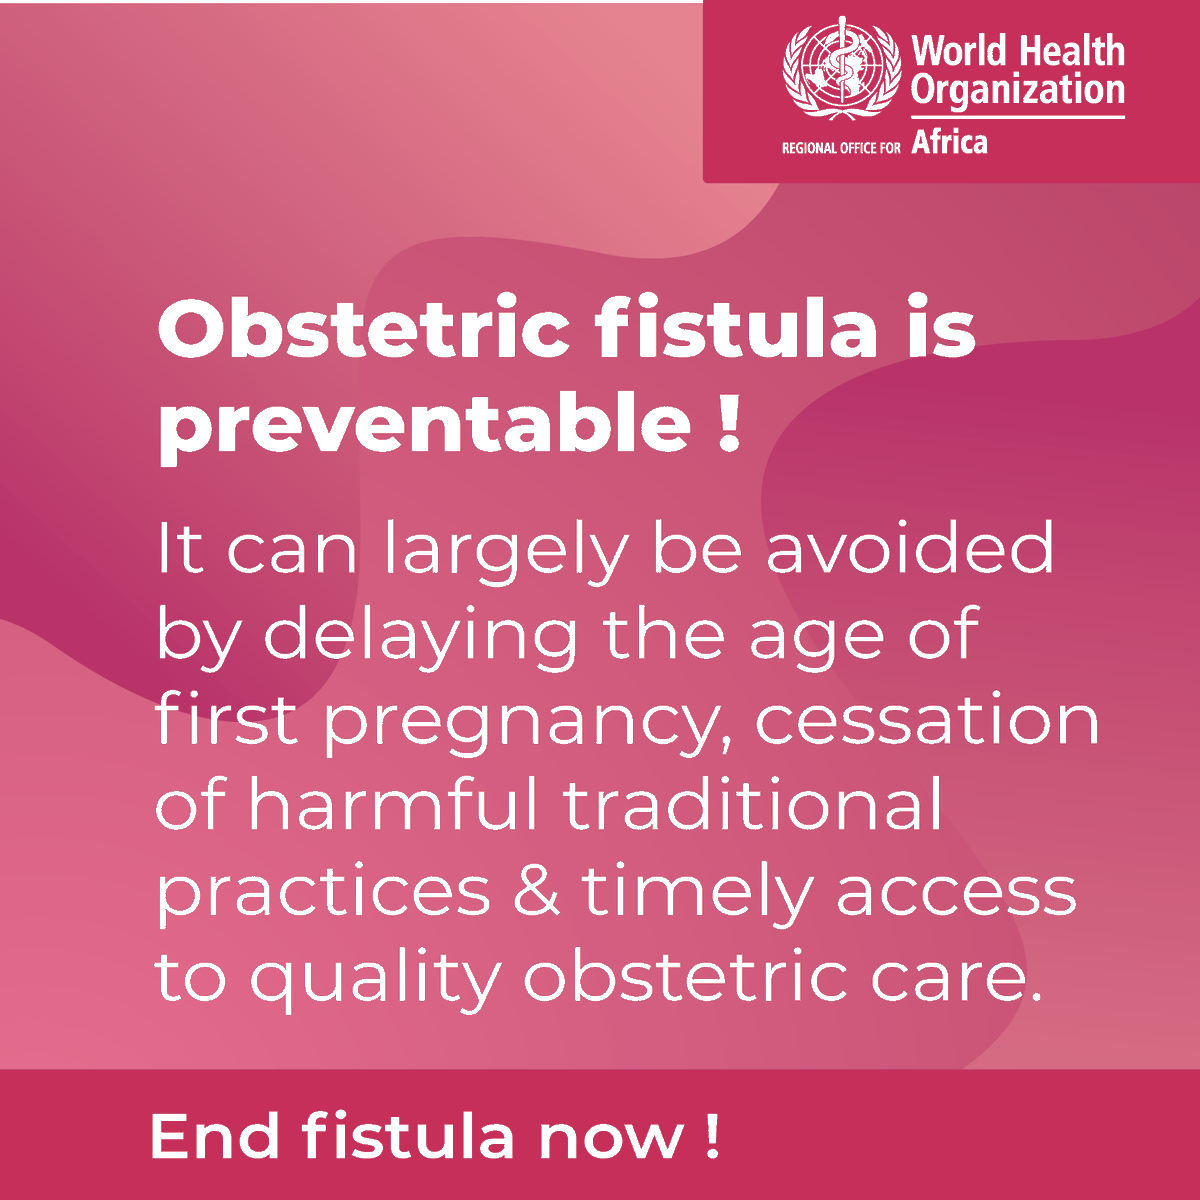 Obstetric fistula can be prevented by:

🕒 Delaying the age of first pregnancy.
🚫 Ending harmful traditional practices.
🏥 Ensuring timely access to obstetric care.

This preventable condition needs our attention NOW! 

#EndObstetricFistula